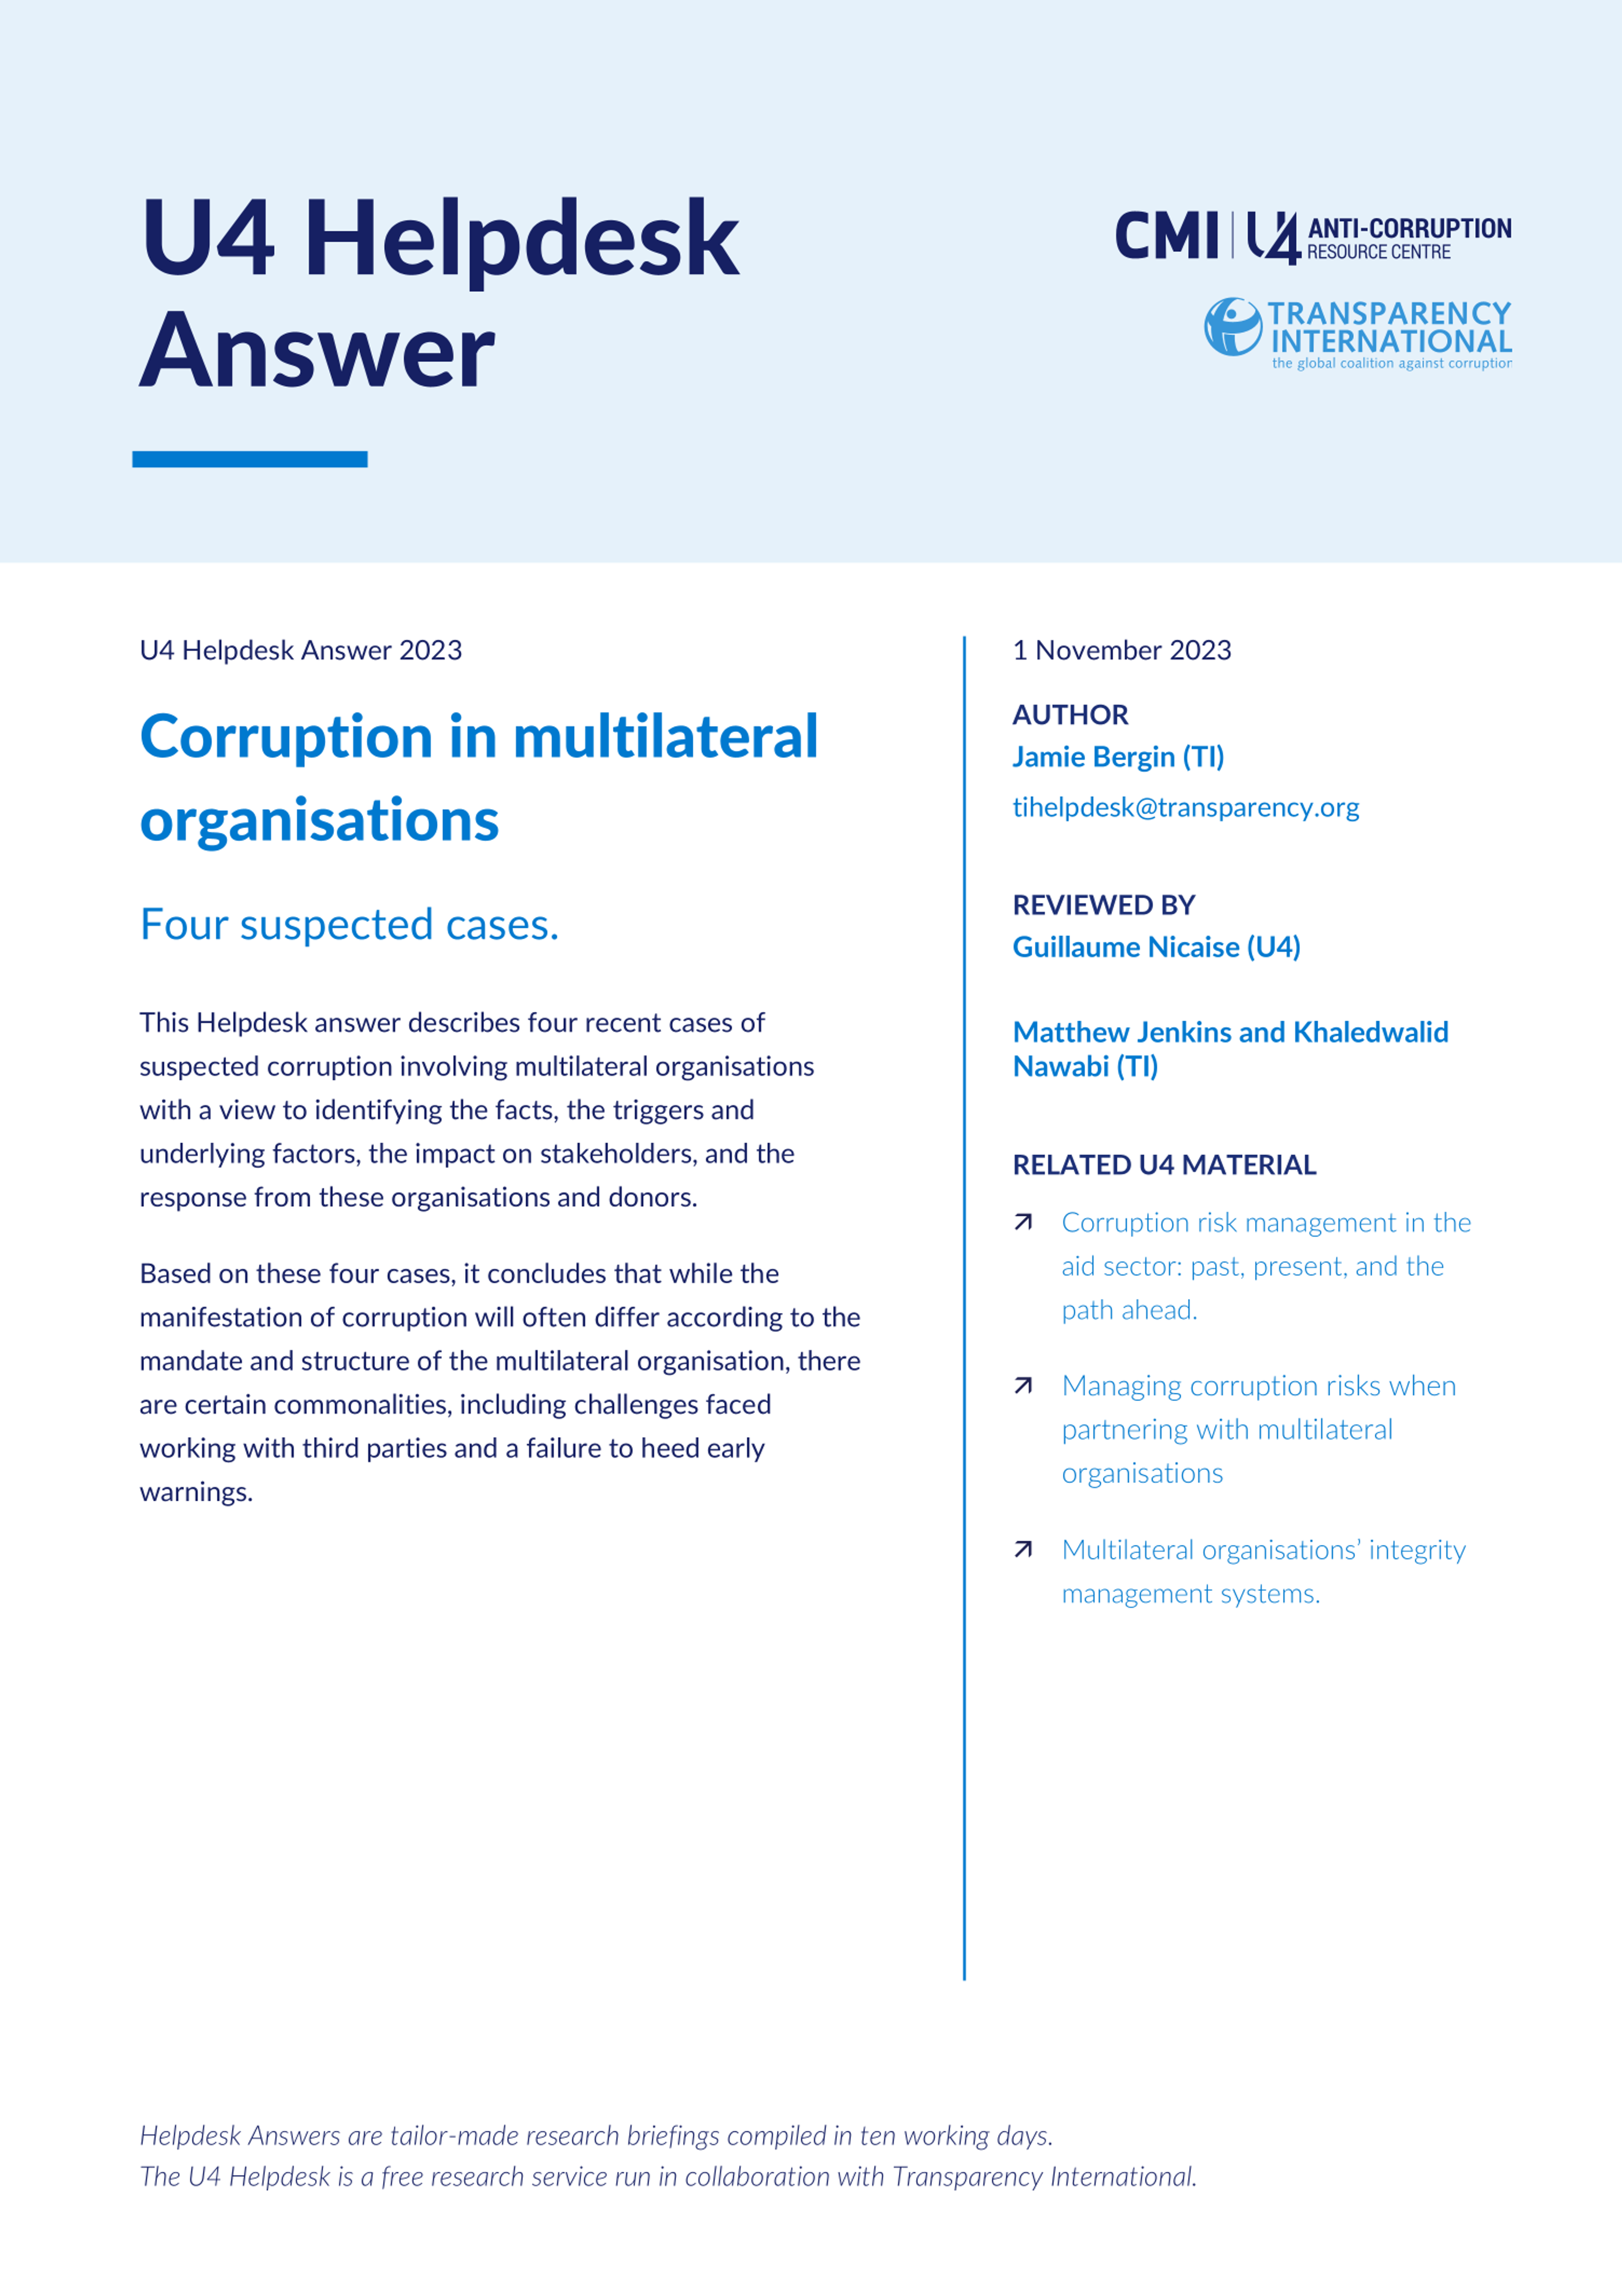 Corruption cases within multilateral organisations